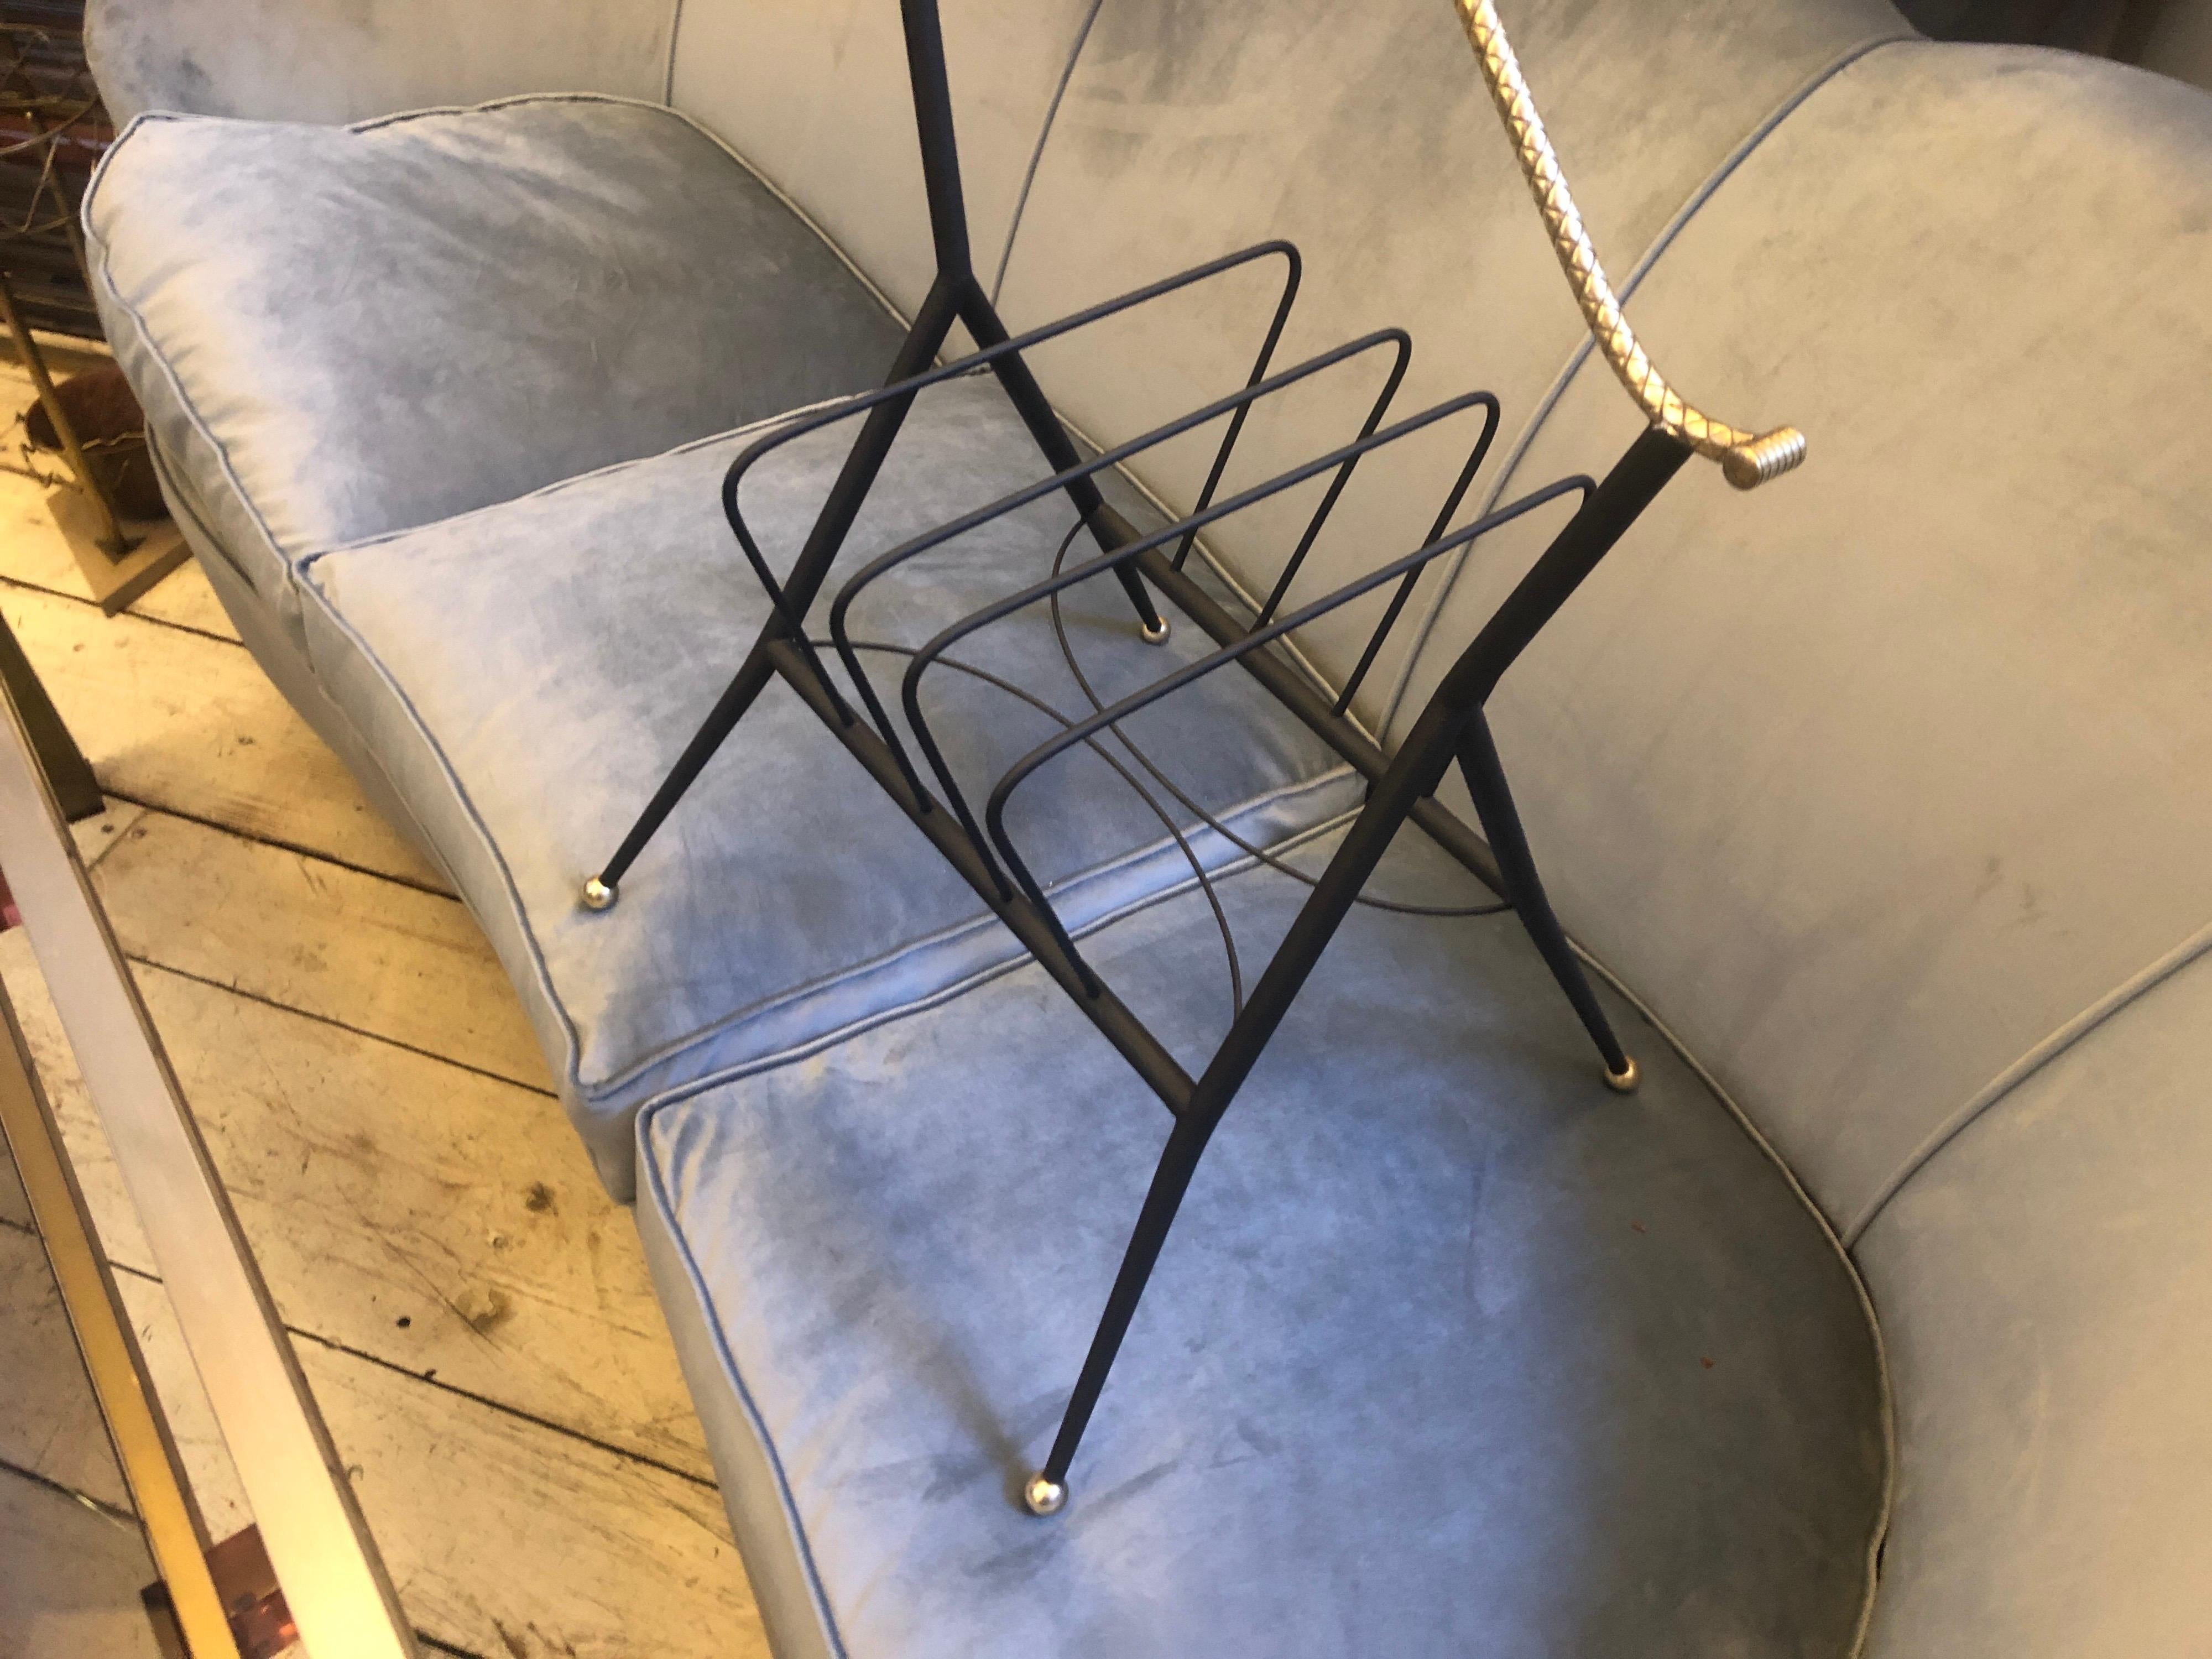 An elegant brass and black metal magazine rack made in Italy in the 1950s, item has been cleaned and restored in original colors, now it's in lovely conditions. This Italian magazine rack embodies the distinctive design elements characteristic of